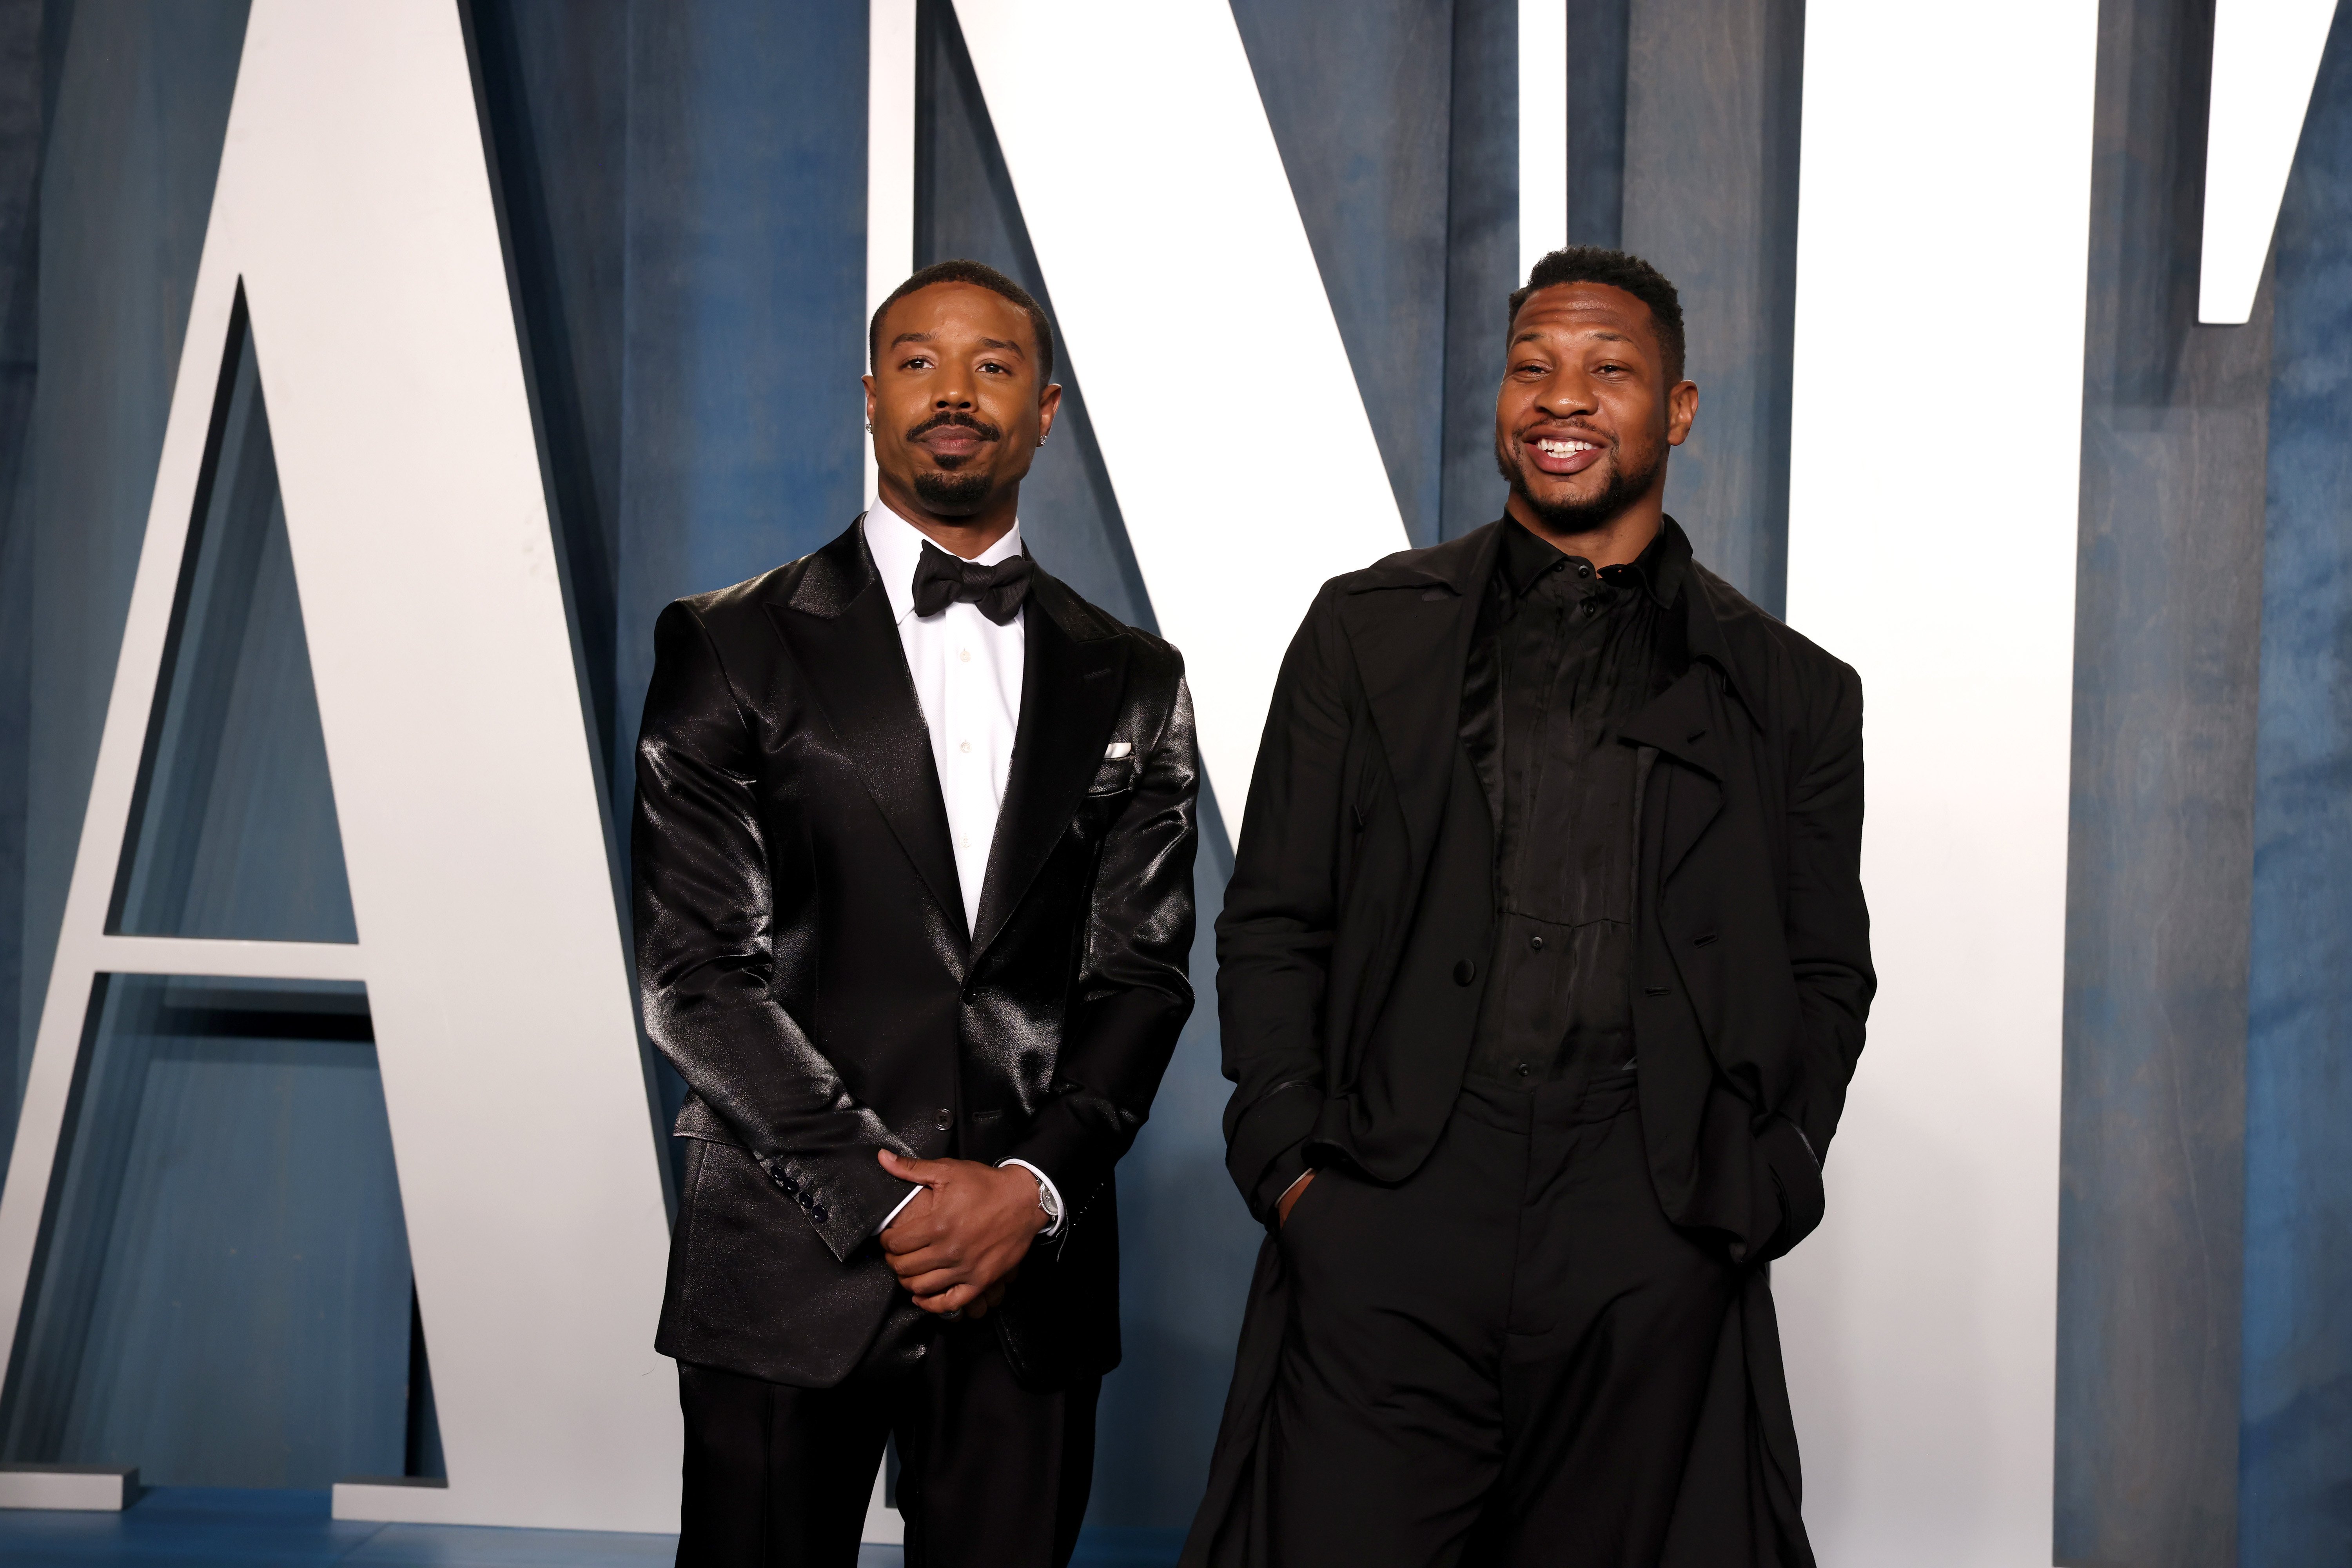 Michael B. Jordan and Jonathan Majors at the Vanity Fair Oscar Party at Wallis Annenberg Center for the Performing Arts in Beverly Hills, California, on March 27, 2022. | Source: Getty Images